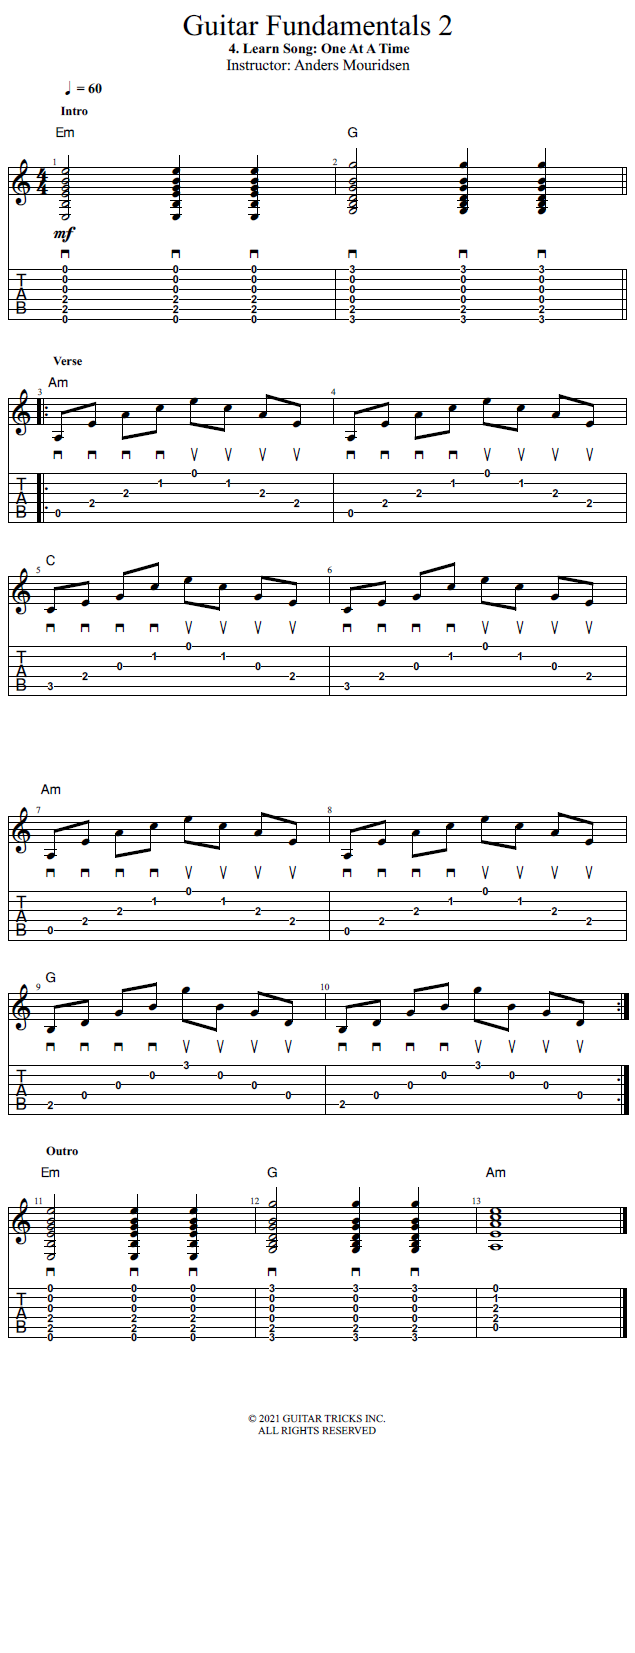 Learn Song: One At A Time song notation